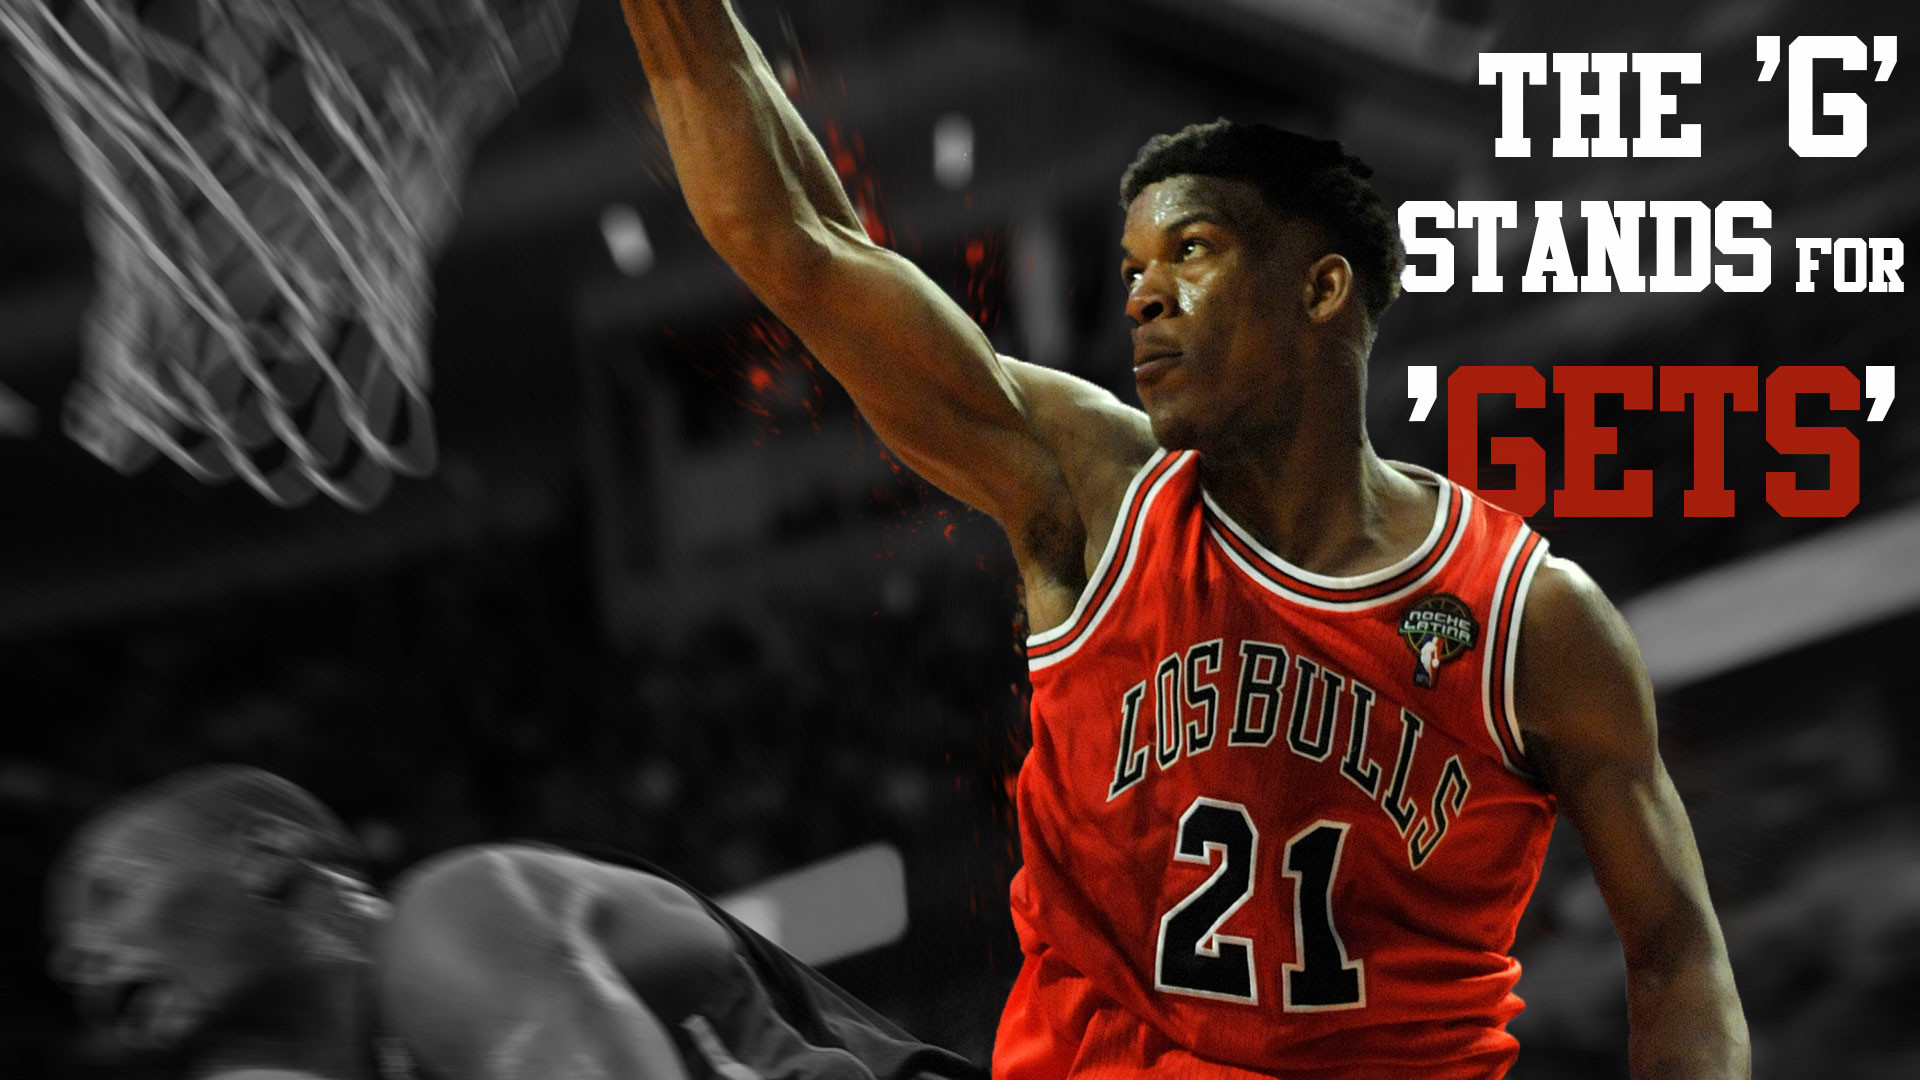 1920x1080 Made a Jimmy Butler wallpaper that will adorn my screen during the playoffs  ...